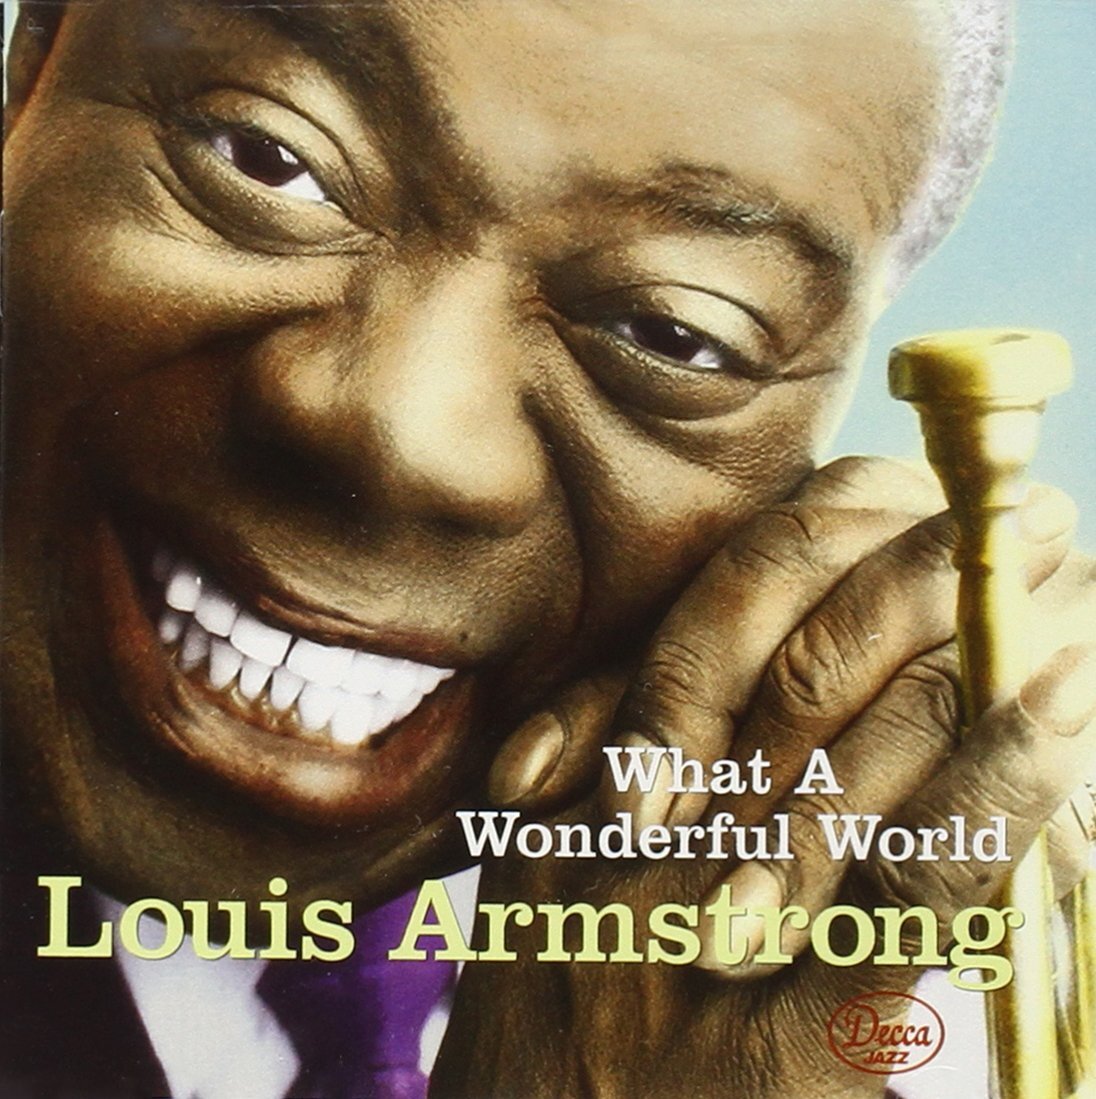 Question 09. Douglon Tse's go-to song to sing at KTV: ‘What a Wonderful World’, by Louis Armstrong.